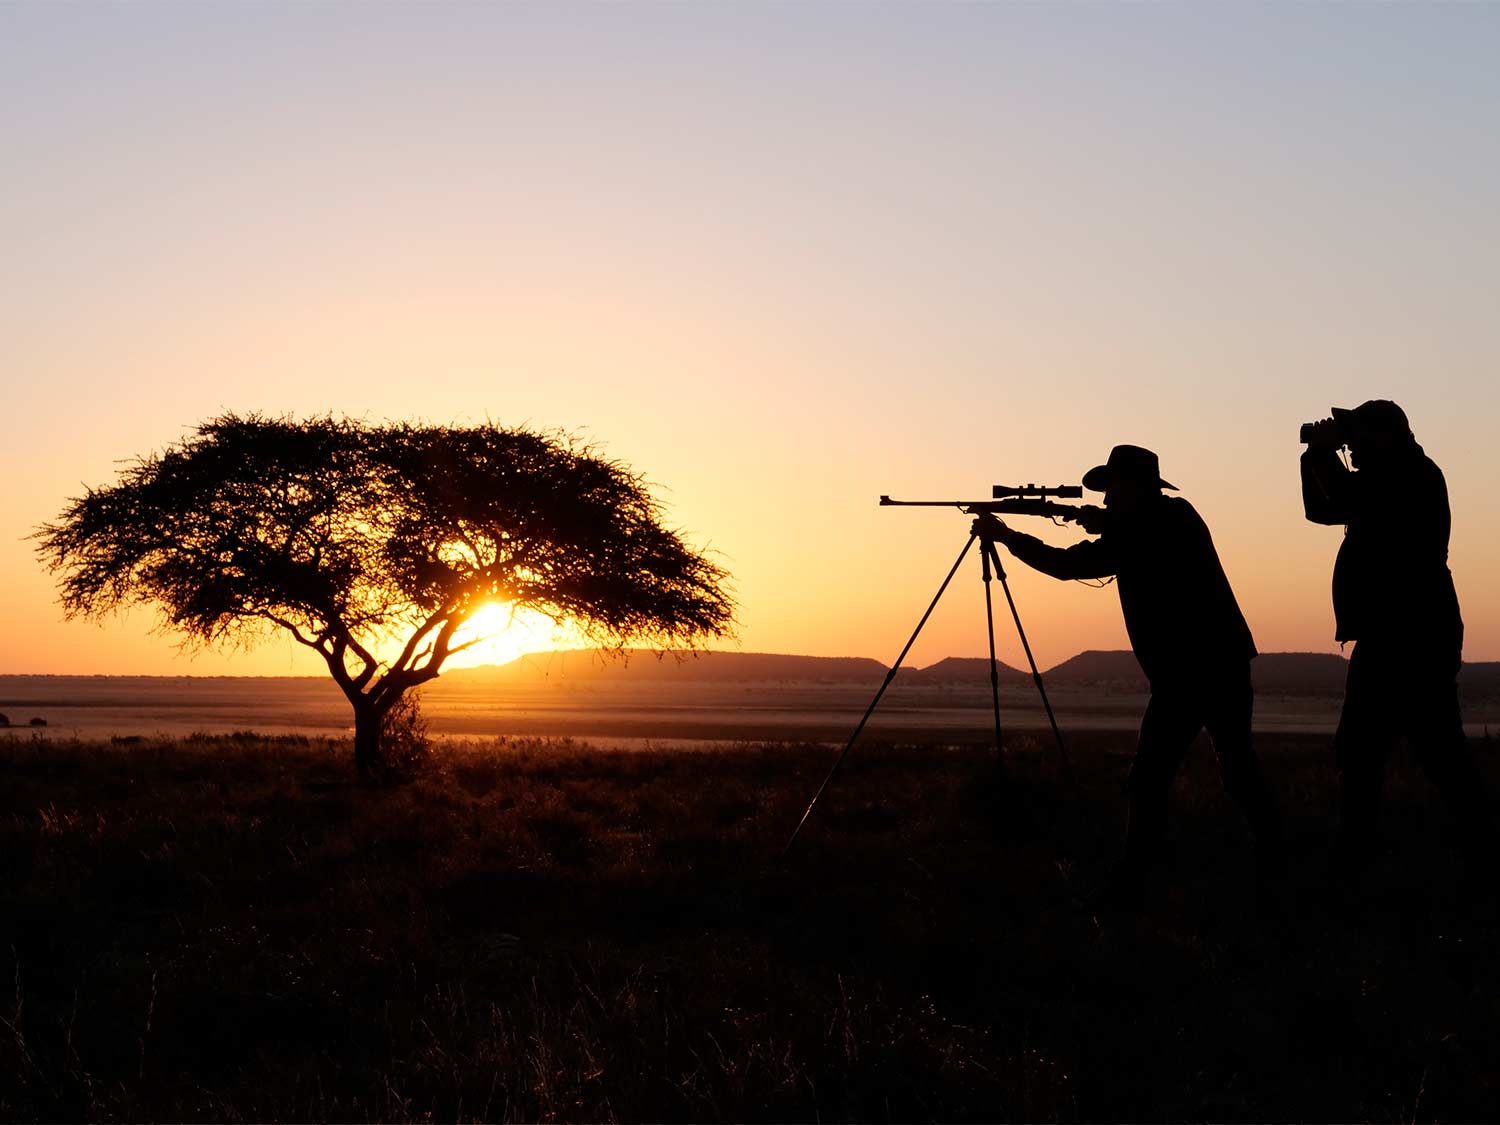 Hunters in Africa during the sunset.